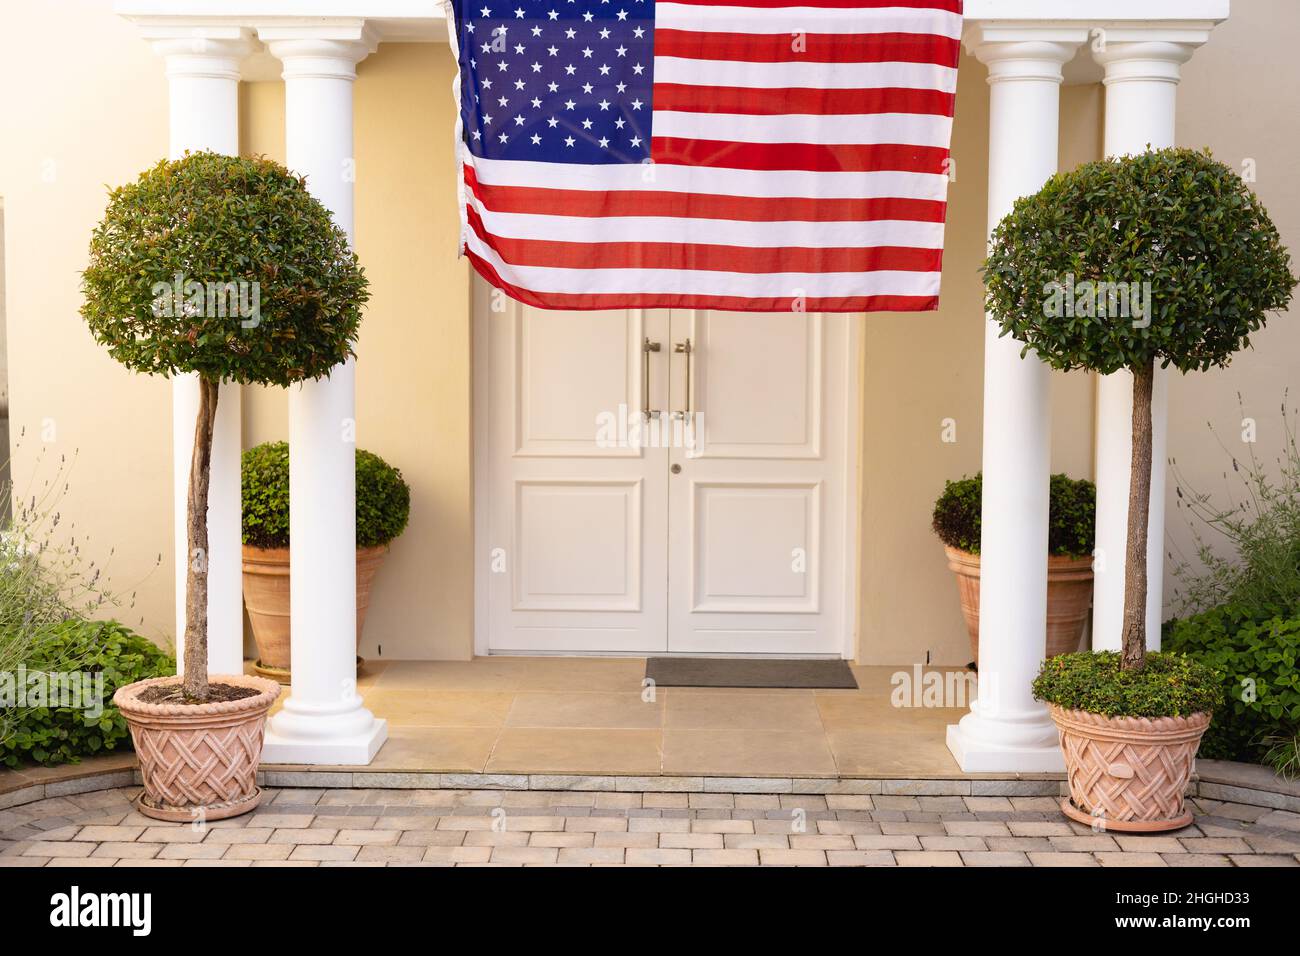 America flag hanging amidst plants at front entrance of house Stock Photo